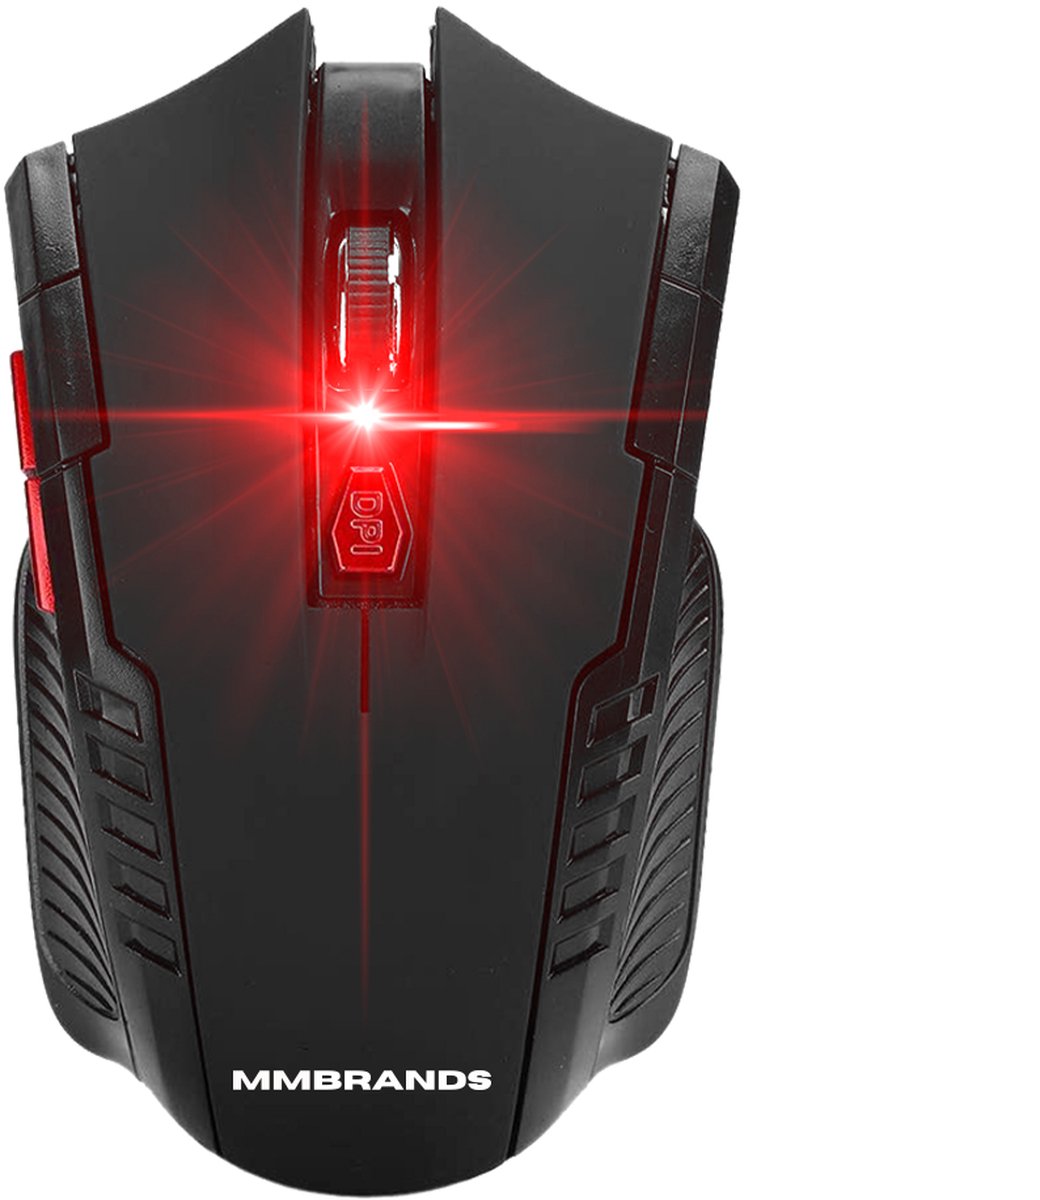 MM Brands Draadloze Game Muis - Gaming Mouse Wireless - Bureau Accessoires